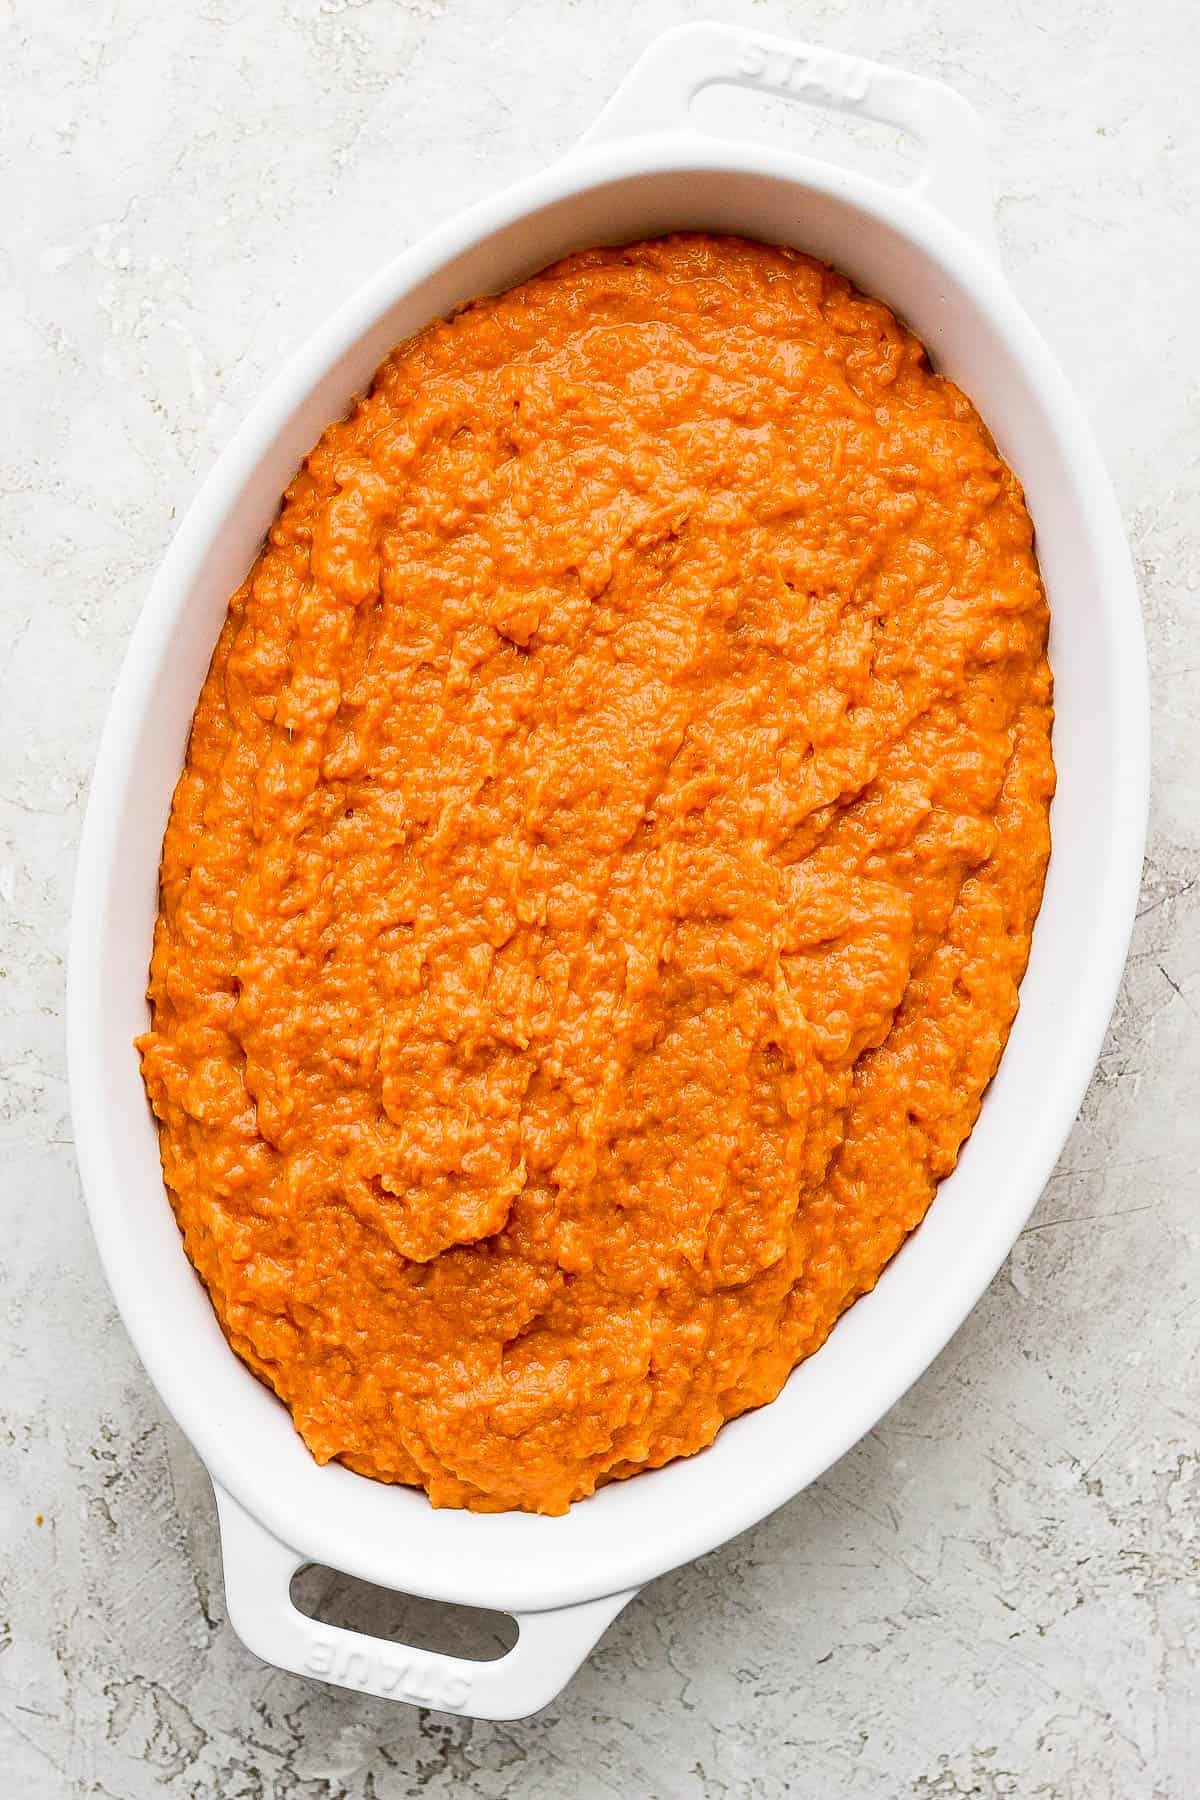 The blended sweet potato mix evenly spread into an oval casserole dish.